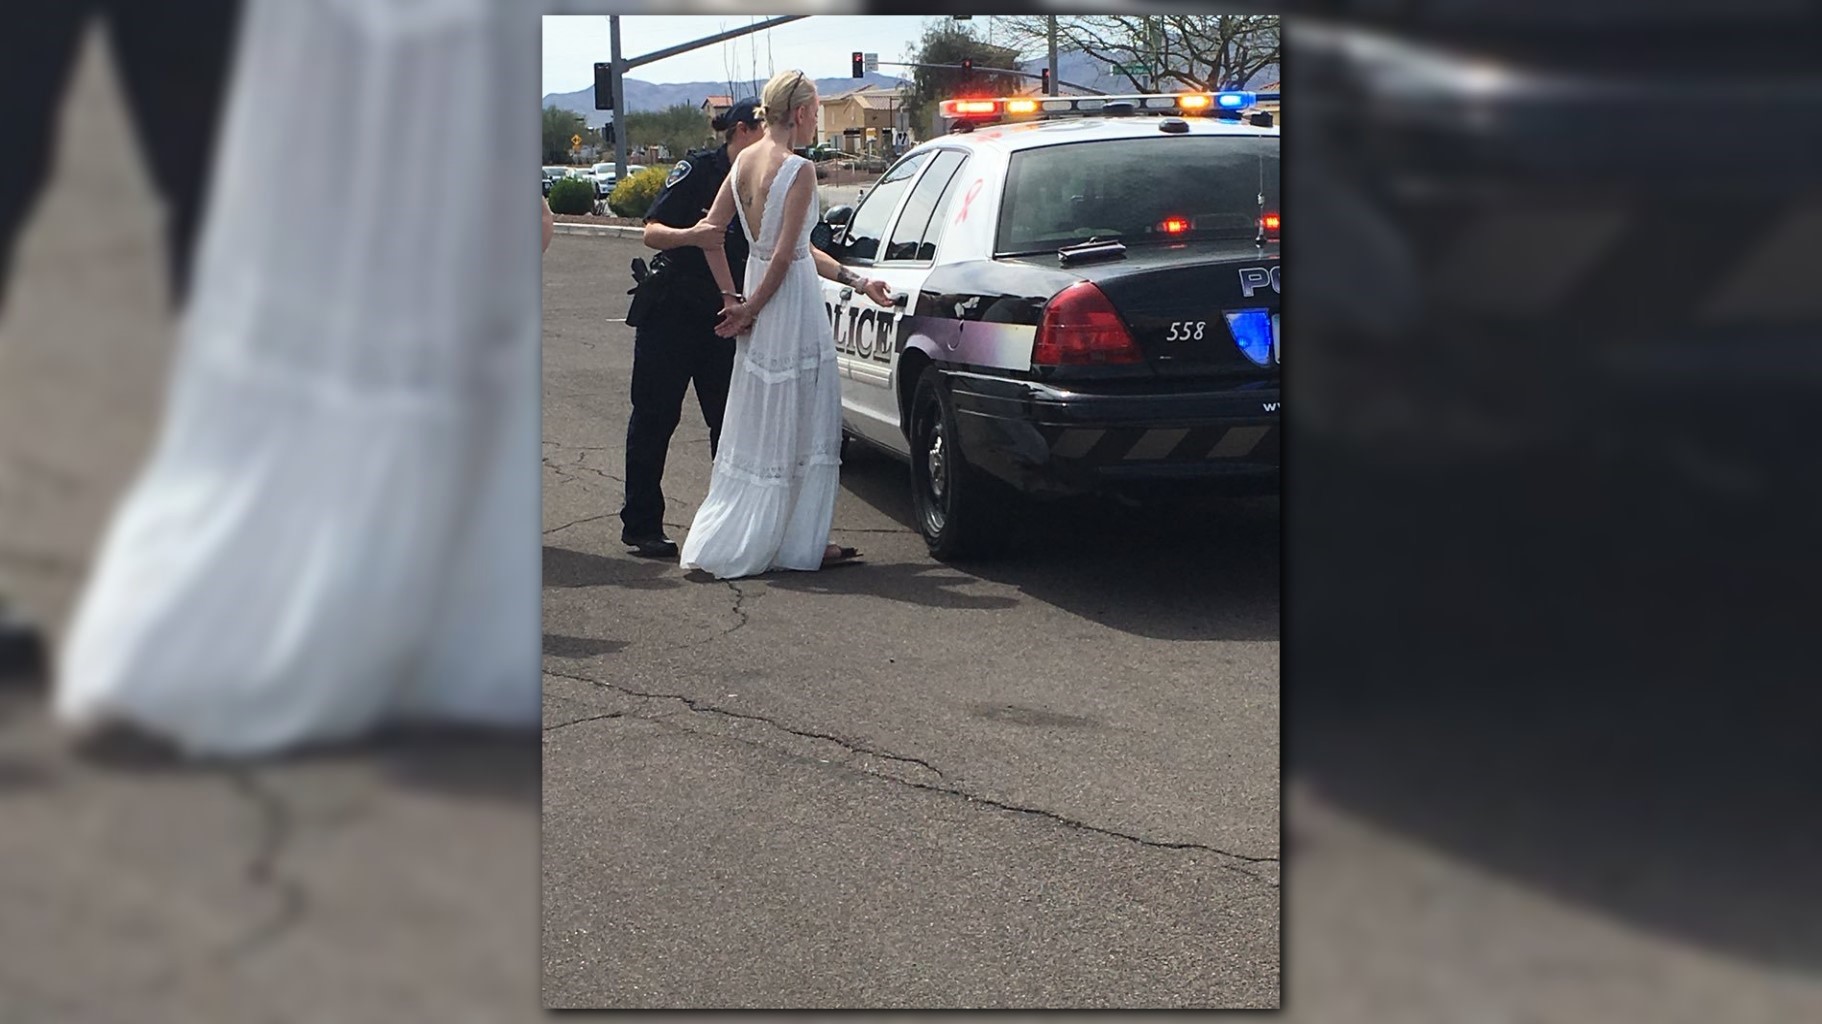 12news.com | Arizona police arrest bride for DUI on her way to the wedding1822 x 1024